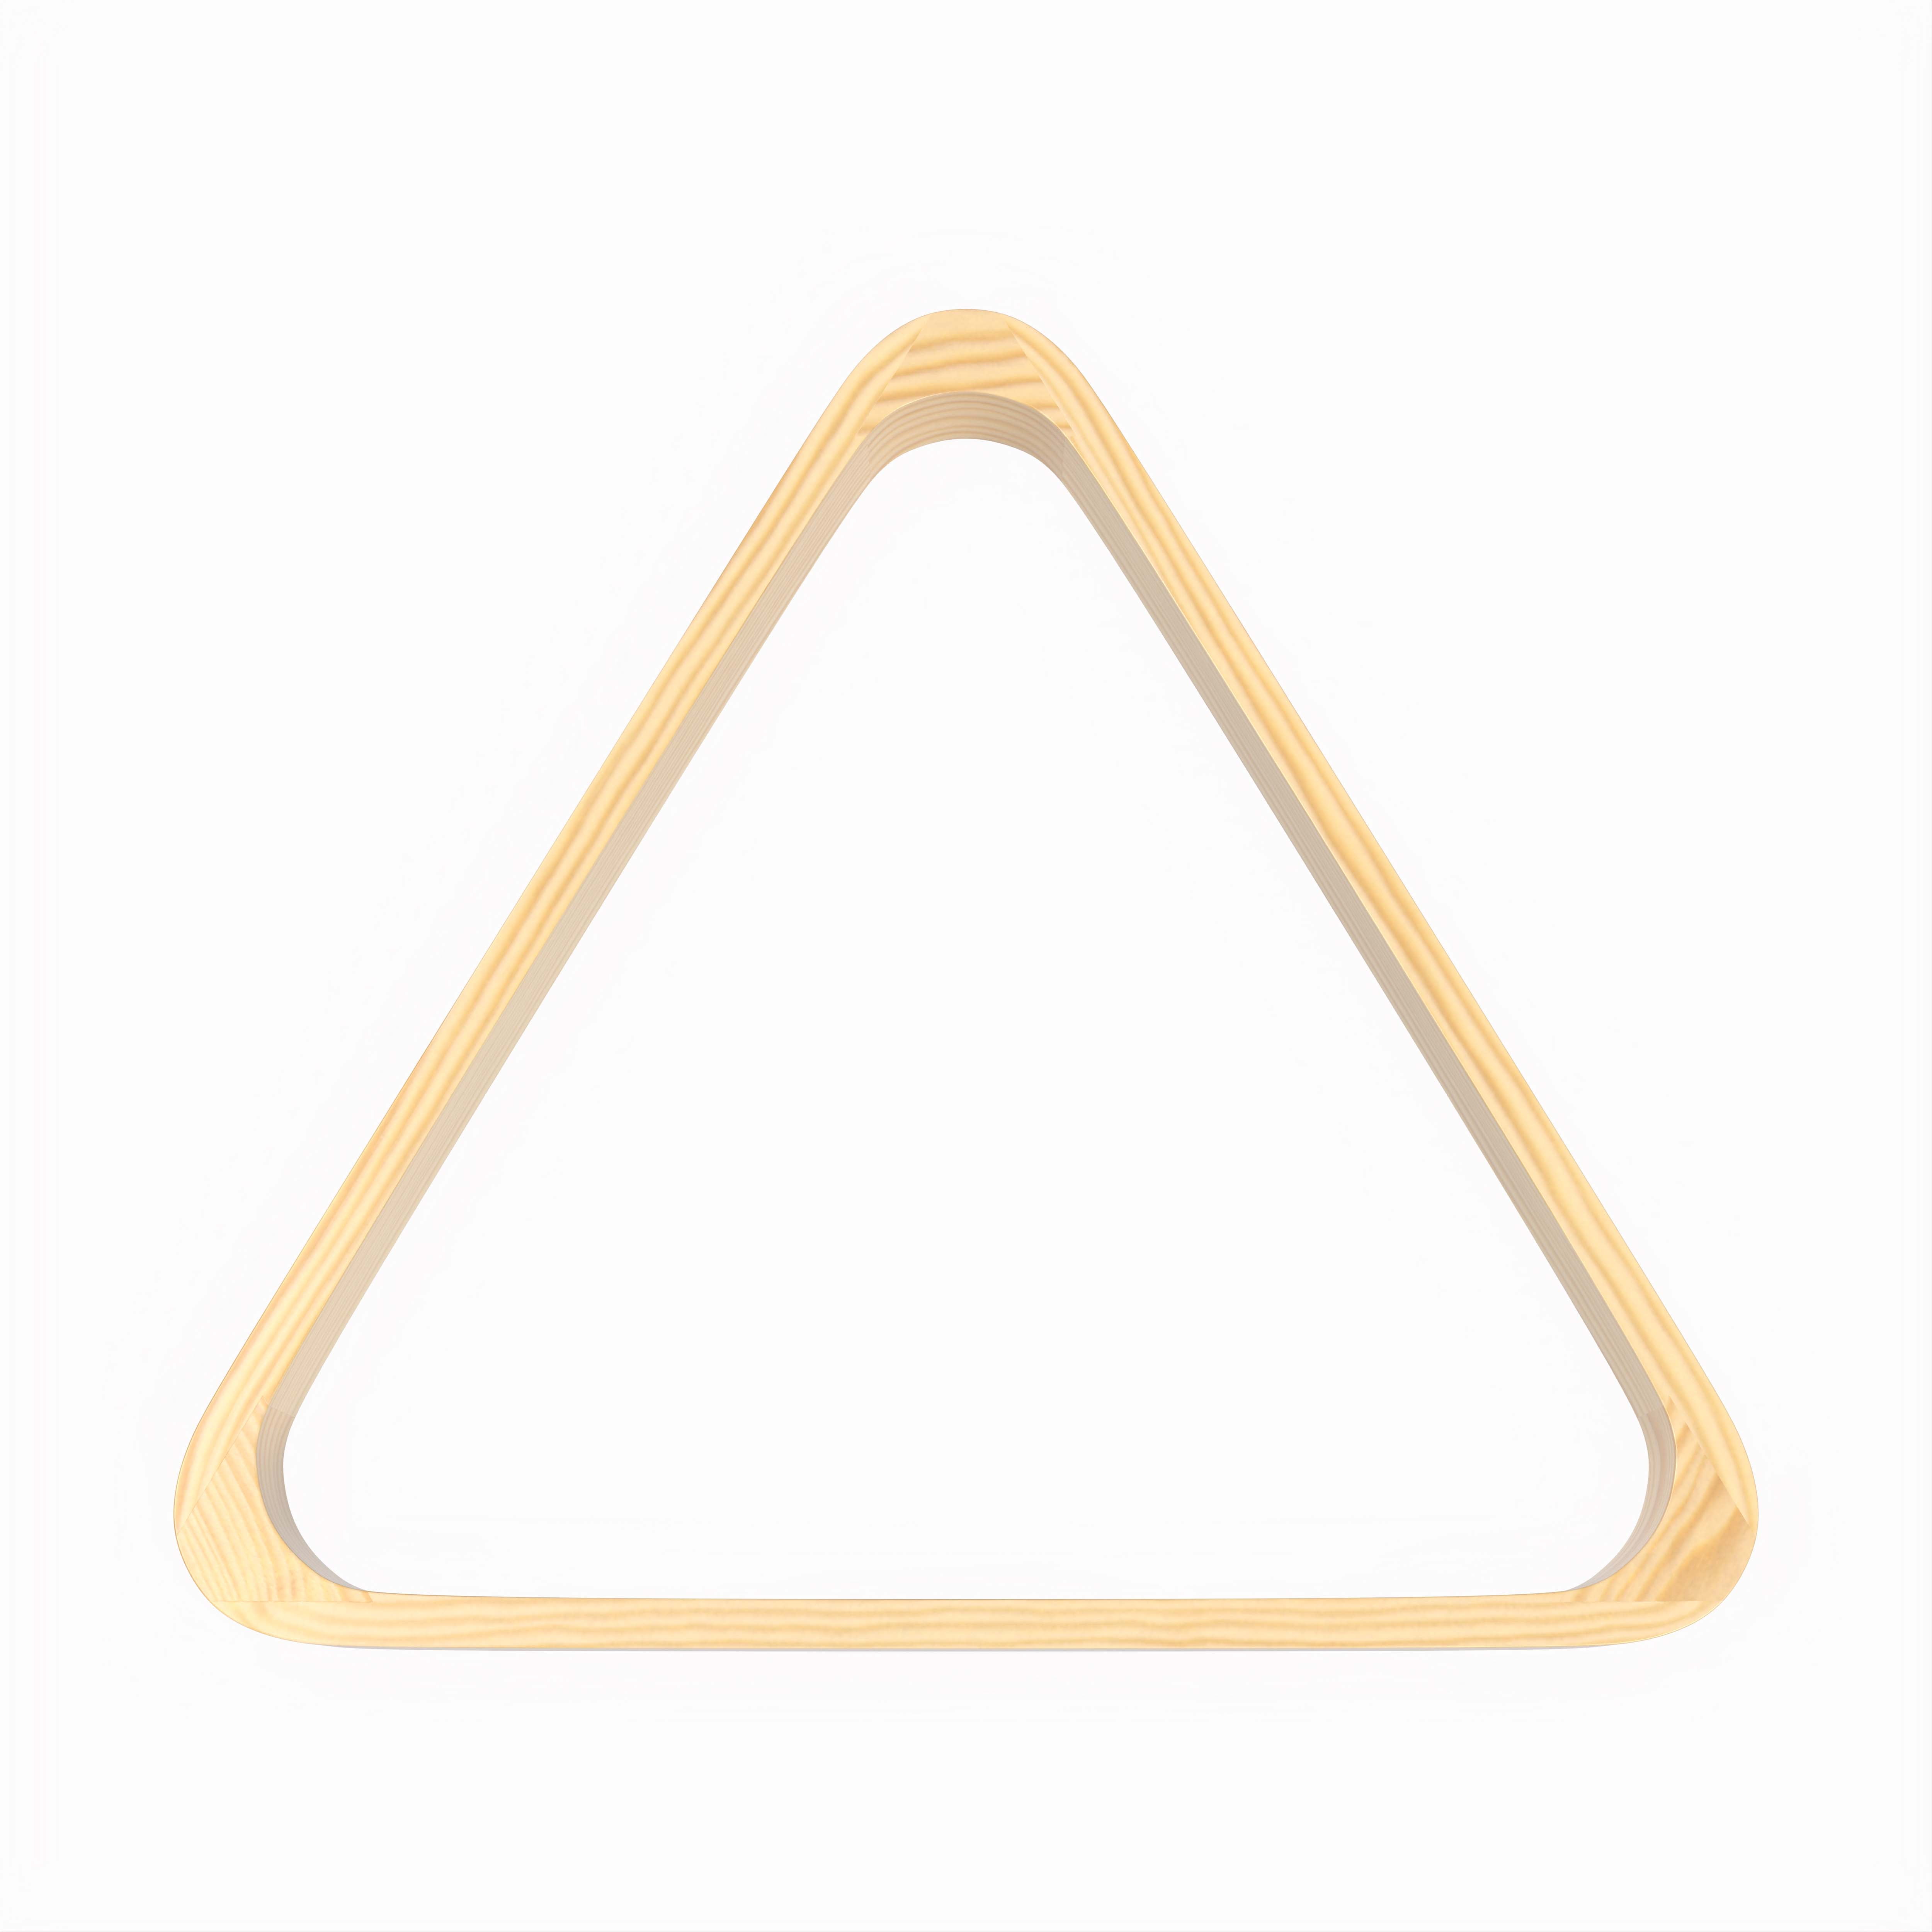 Wooden Snooker Ball Triangle 